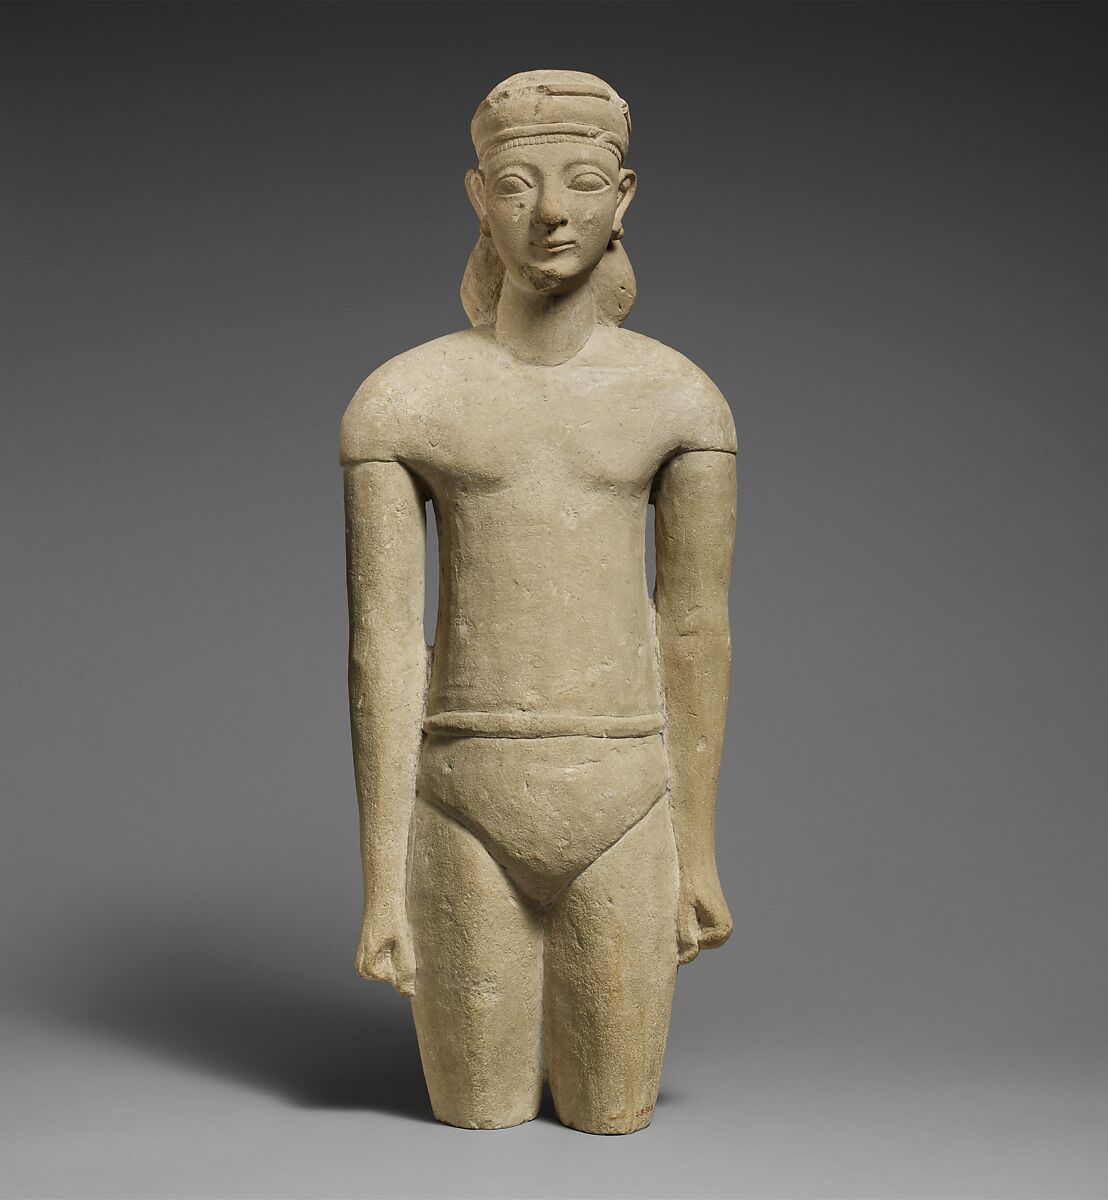 Limestone statuette of a male votary with Cypriot shorts and a diadem, Limestone, Cypriot